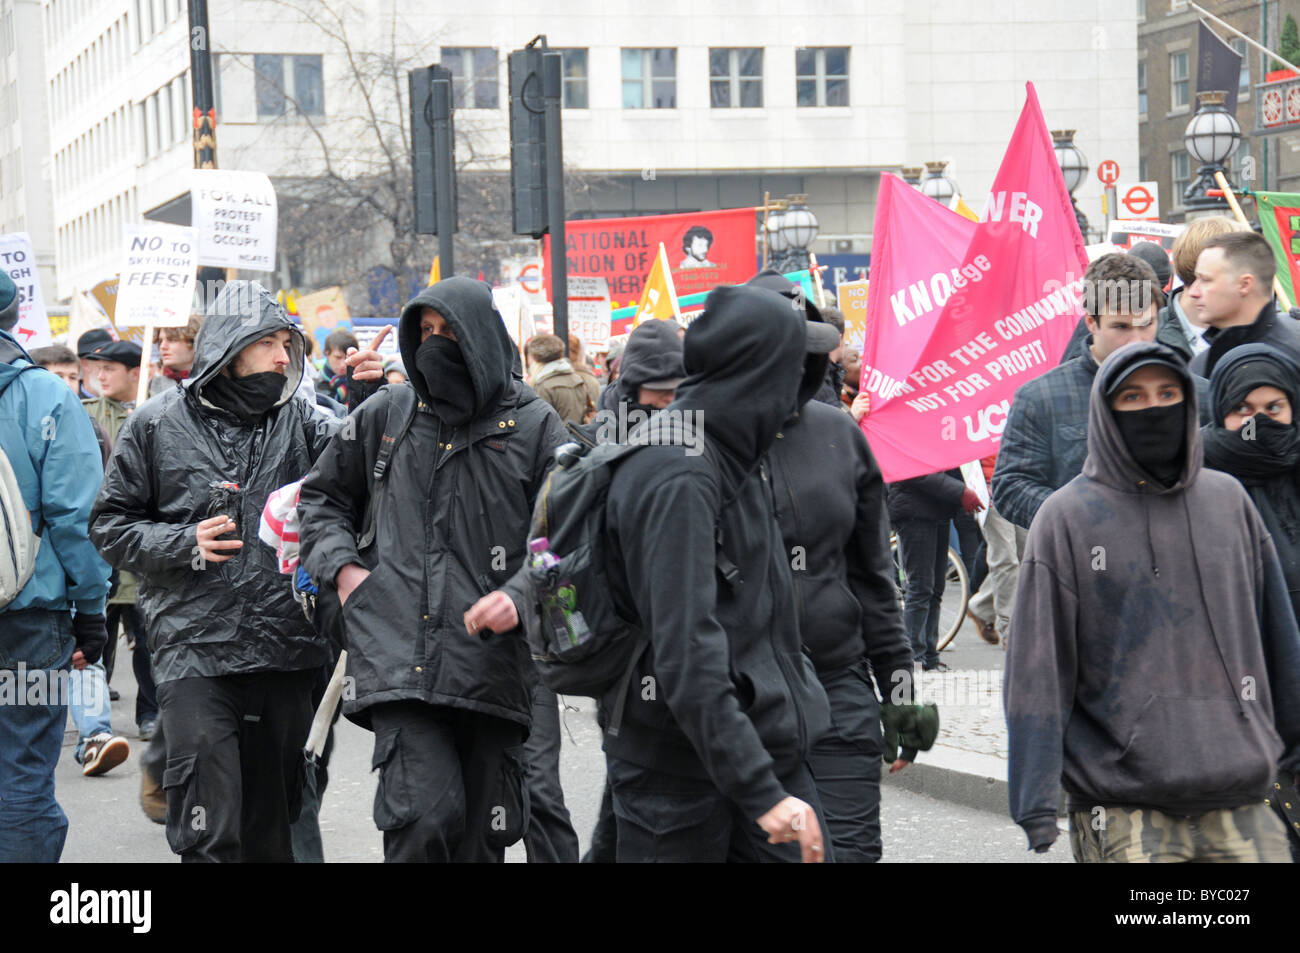 NUS TUC Balaclava and masked protesters Student and Union protest against tuition fees and job losses Stock Photo